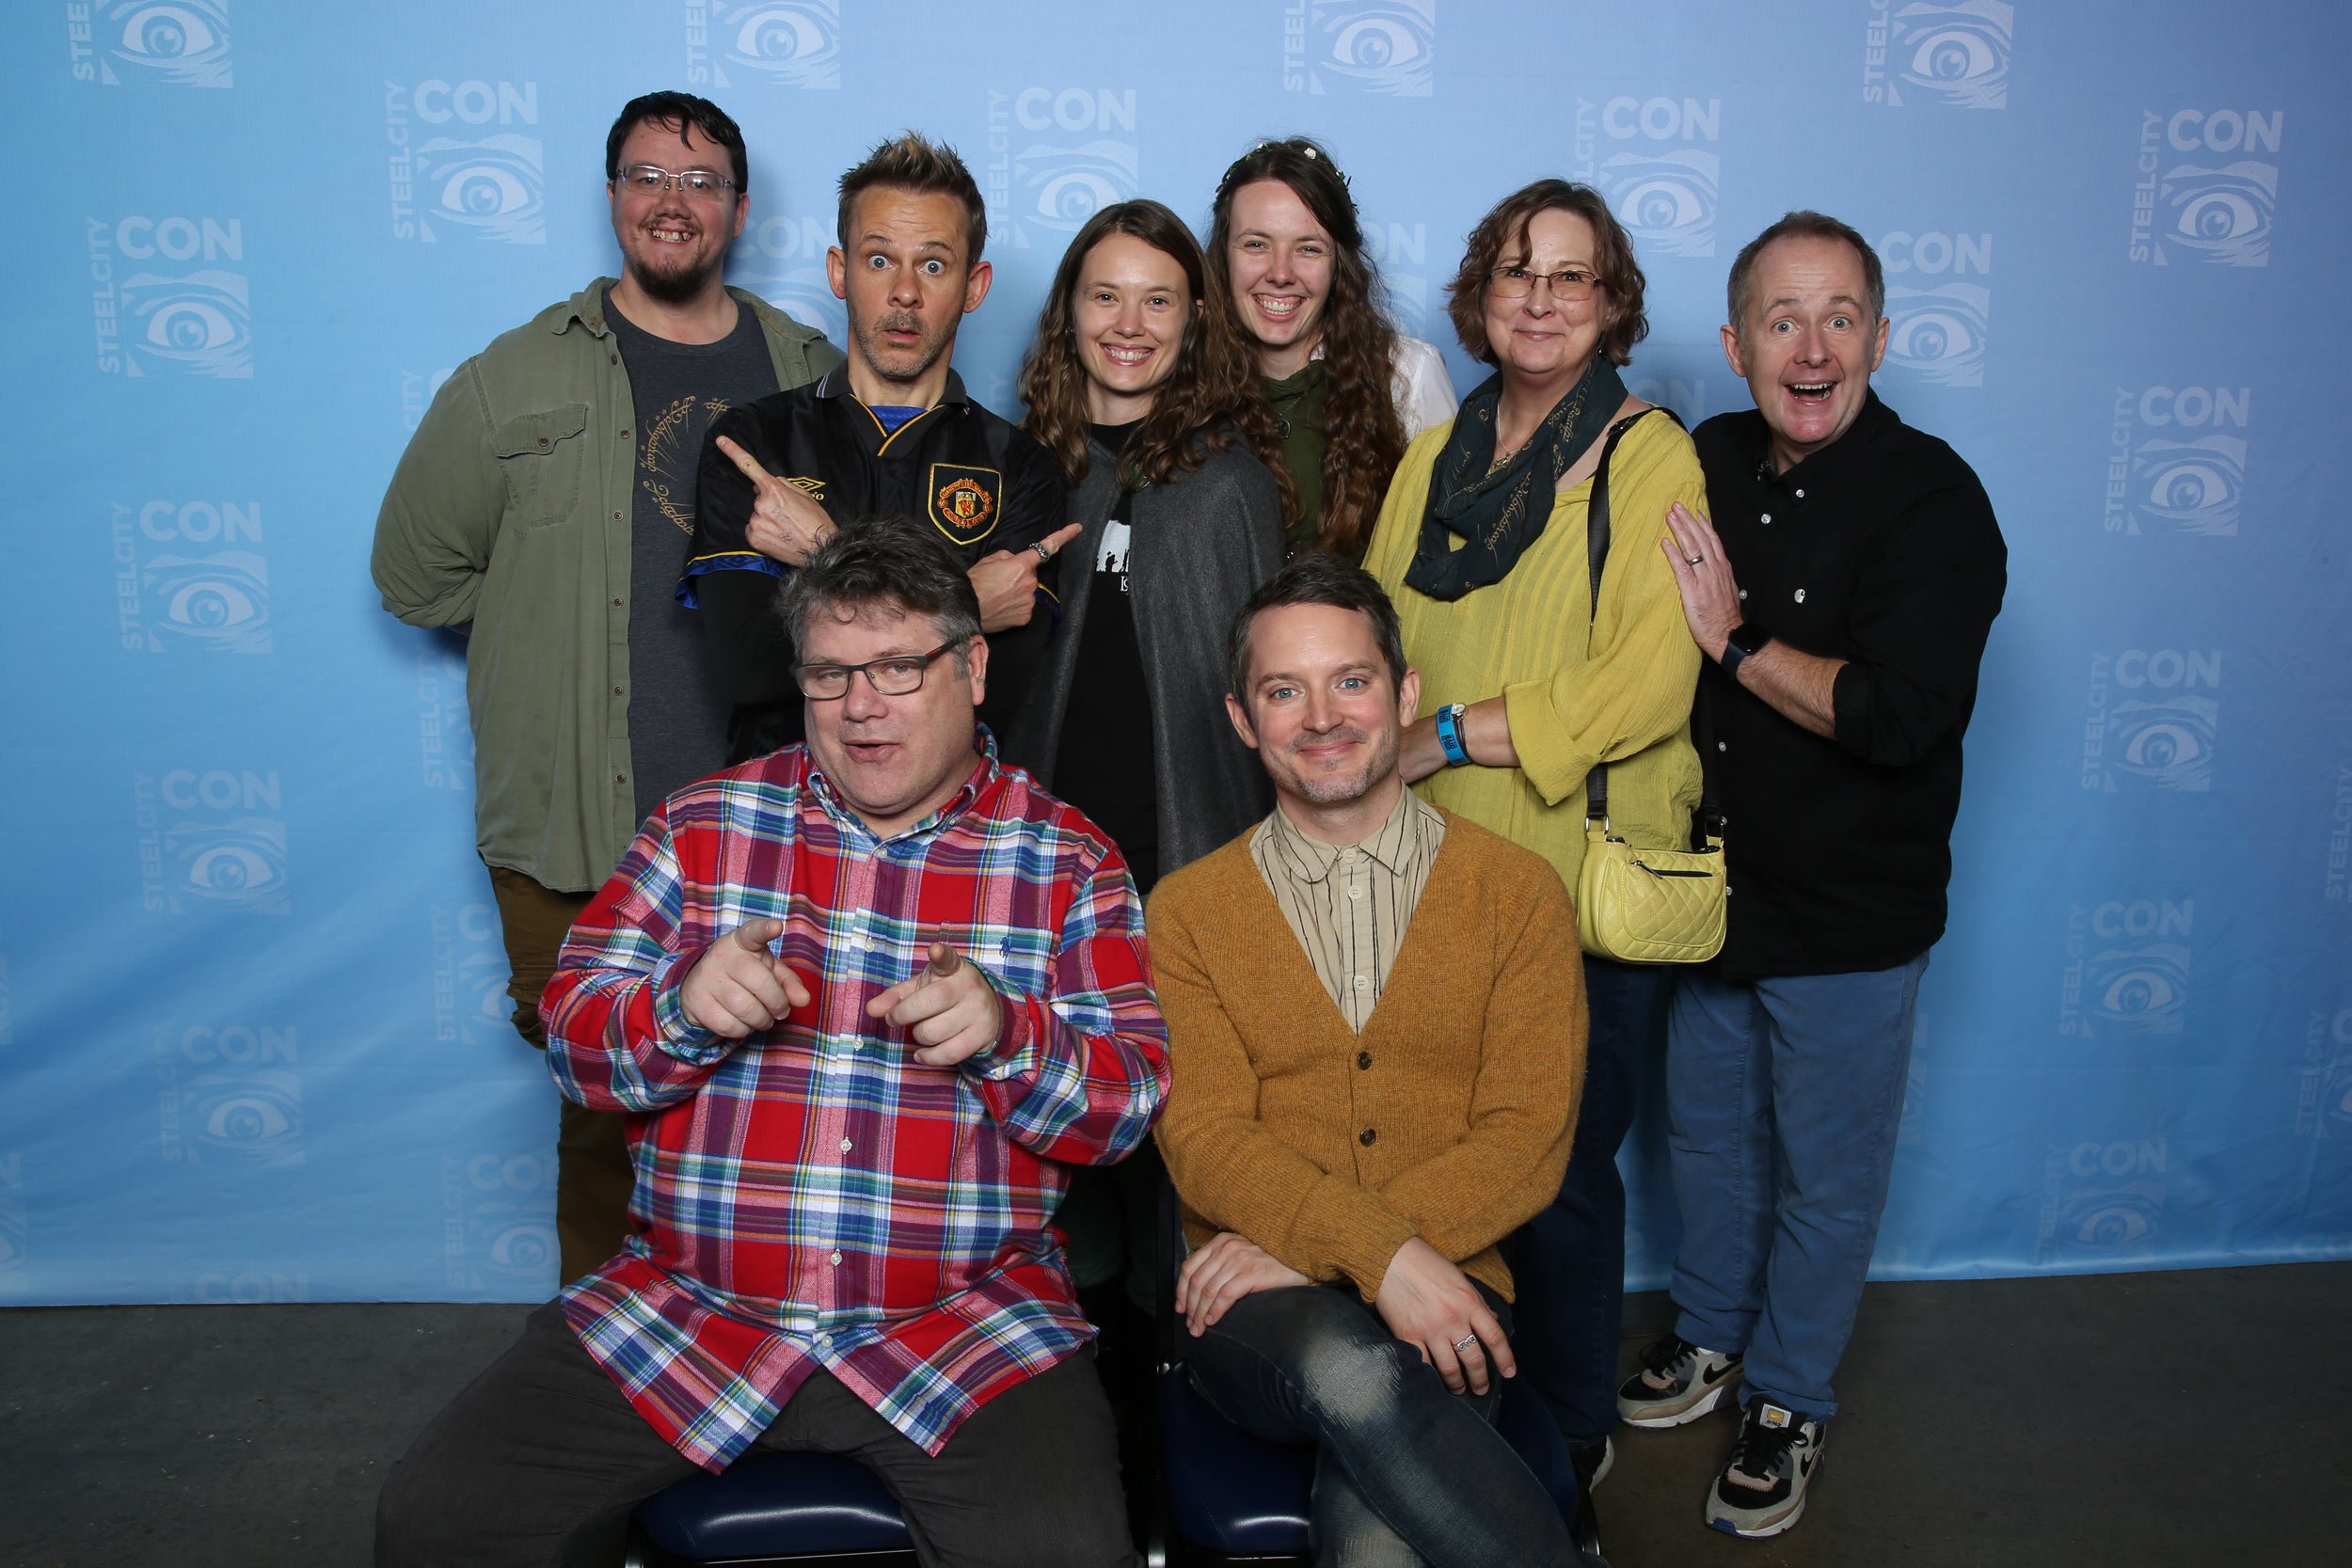 meeting-the-four-hobbits-at-comi-con